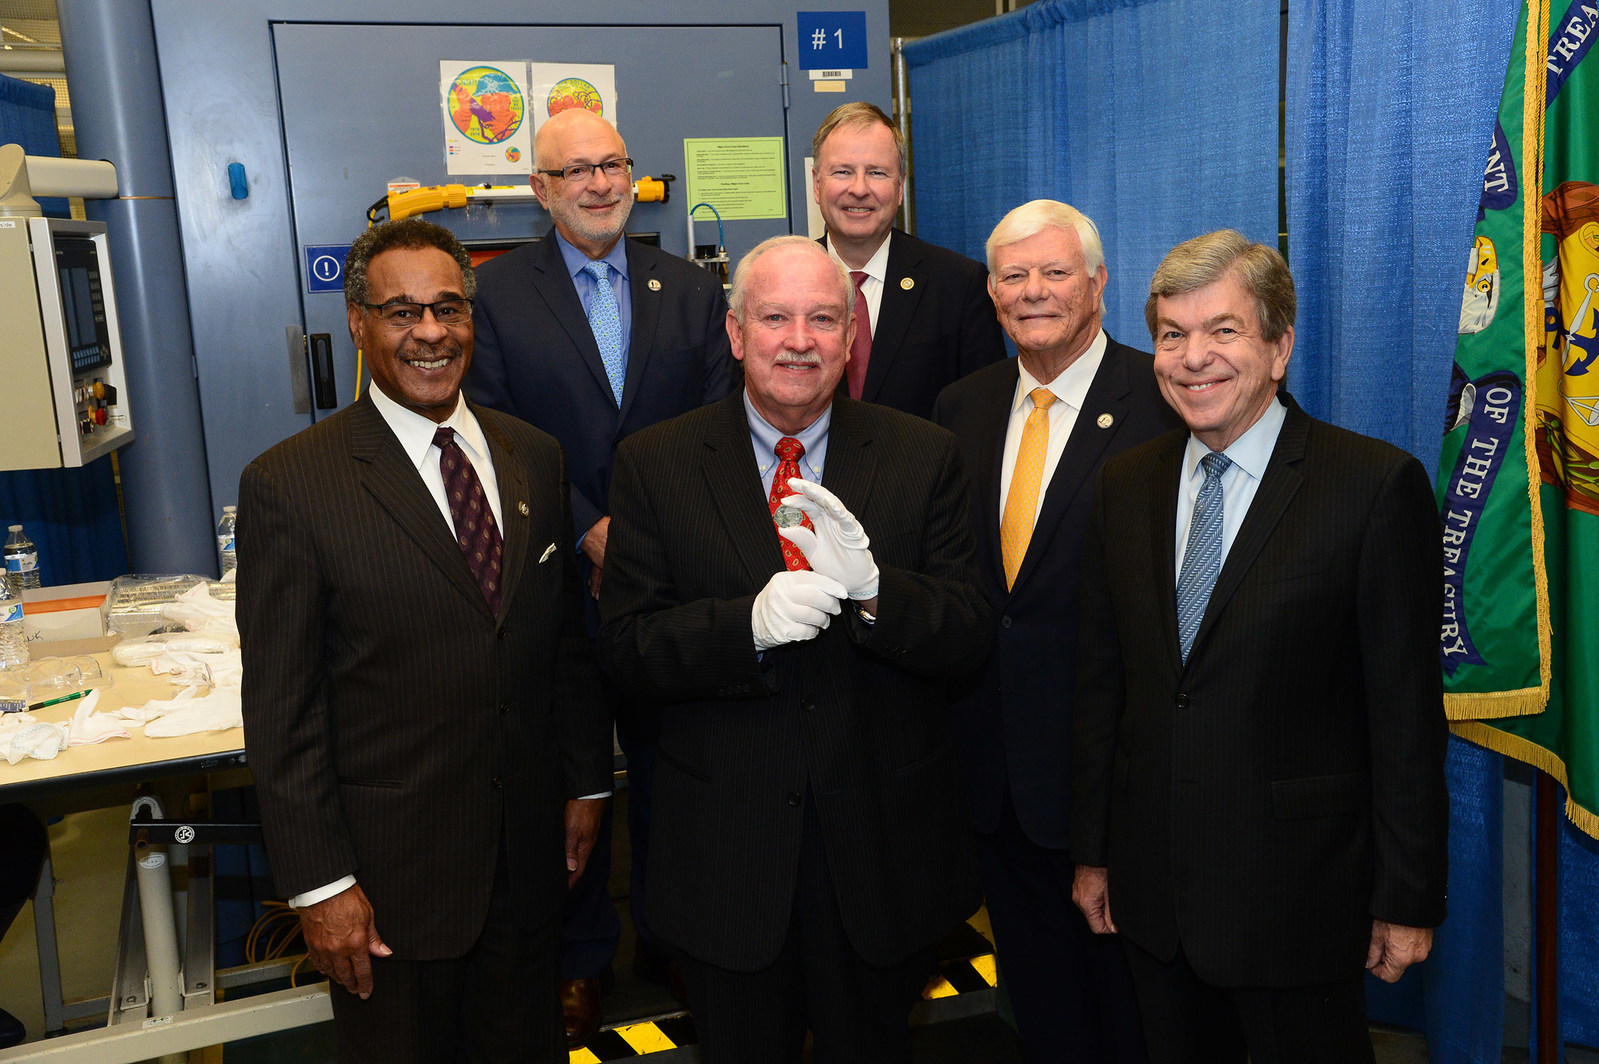 Gerald York, grandson of WWI hero SGT Alvin York, holds the U.S. Mint's newly-minted 2018 WWI Centennial Silver Dollar. He is joined by (l to r) Congressman Emanuel Cleaver, II (D-Missouri), Daniel Basta, U.S. Foundation for the Commemoration of the World Wars, Congressman Doug Lamborn (R-Colorado), U.S. WWI Centennial Commission Chair Terry Hamby and Senator Roy Blunt (R-Missouri). The new commemorative coin was authorized by Congress, through bipartisan legislation. The coin, available to the public in January 2018 via www.usmint.gov, honors America's WWI veterans during the centennial period of the war, and a surcharge will support work of the Foundation. (PRNewsfoto/U.S. World War One Centennial...)